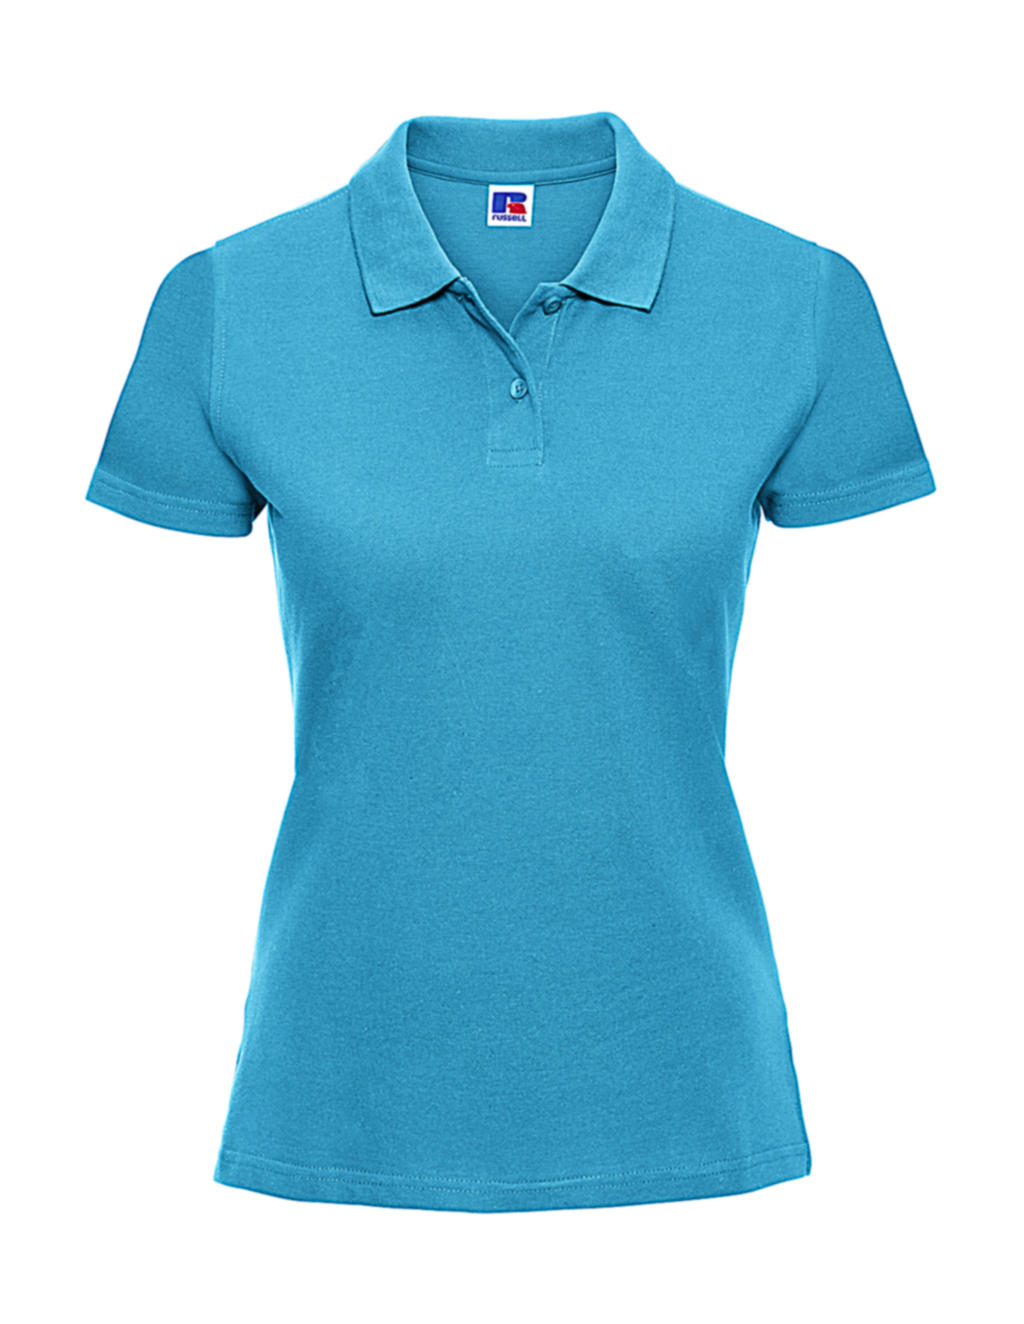  Ladies Classic Cotton Polo in Farbe Turquoise